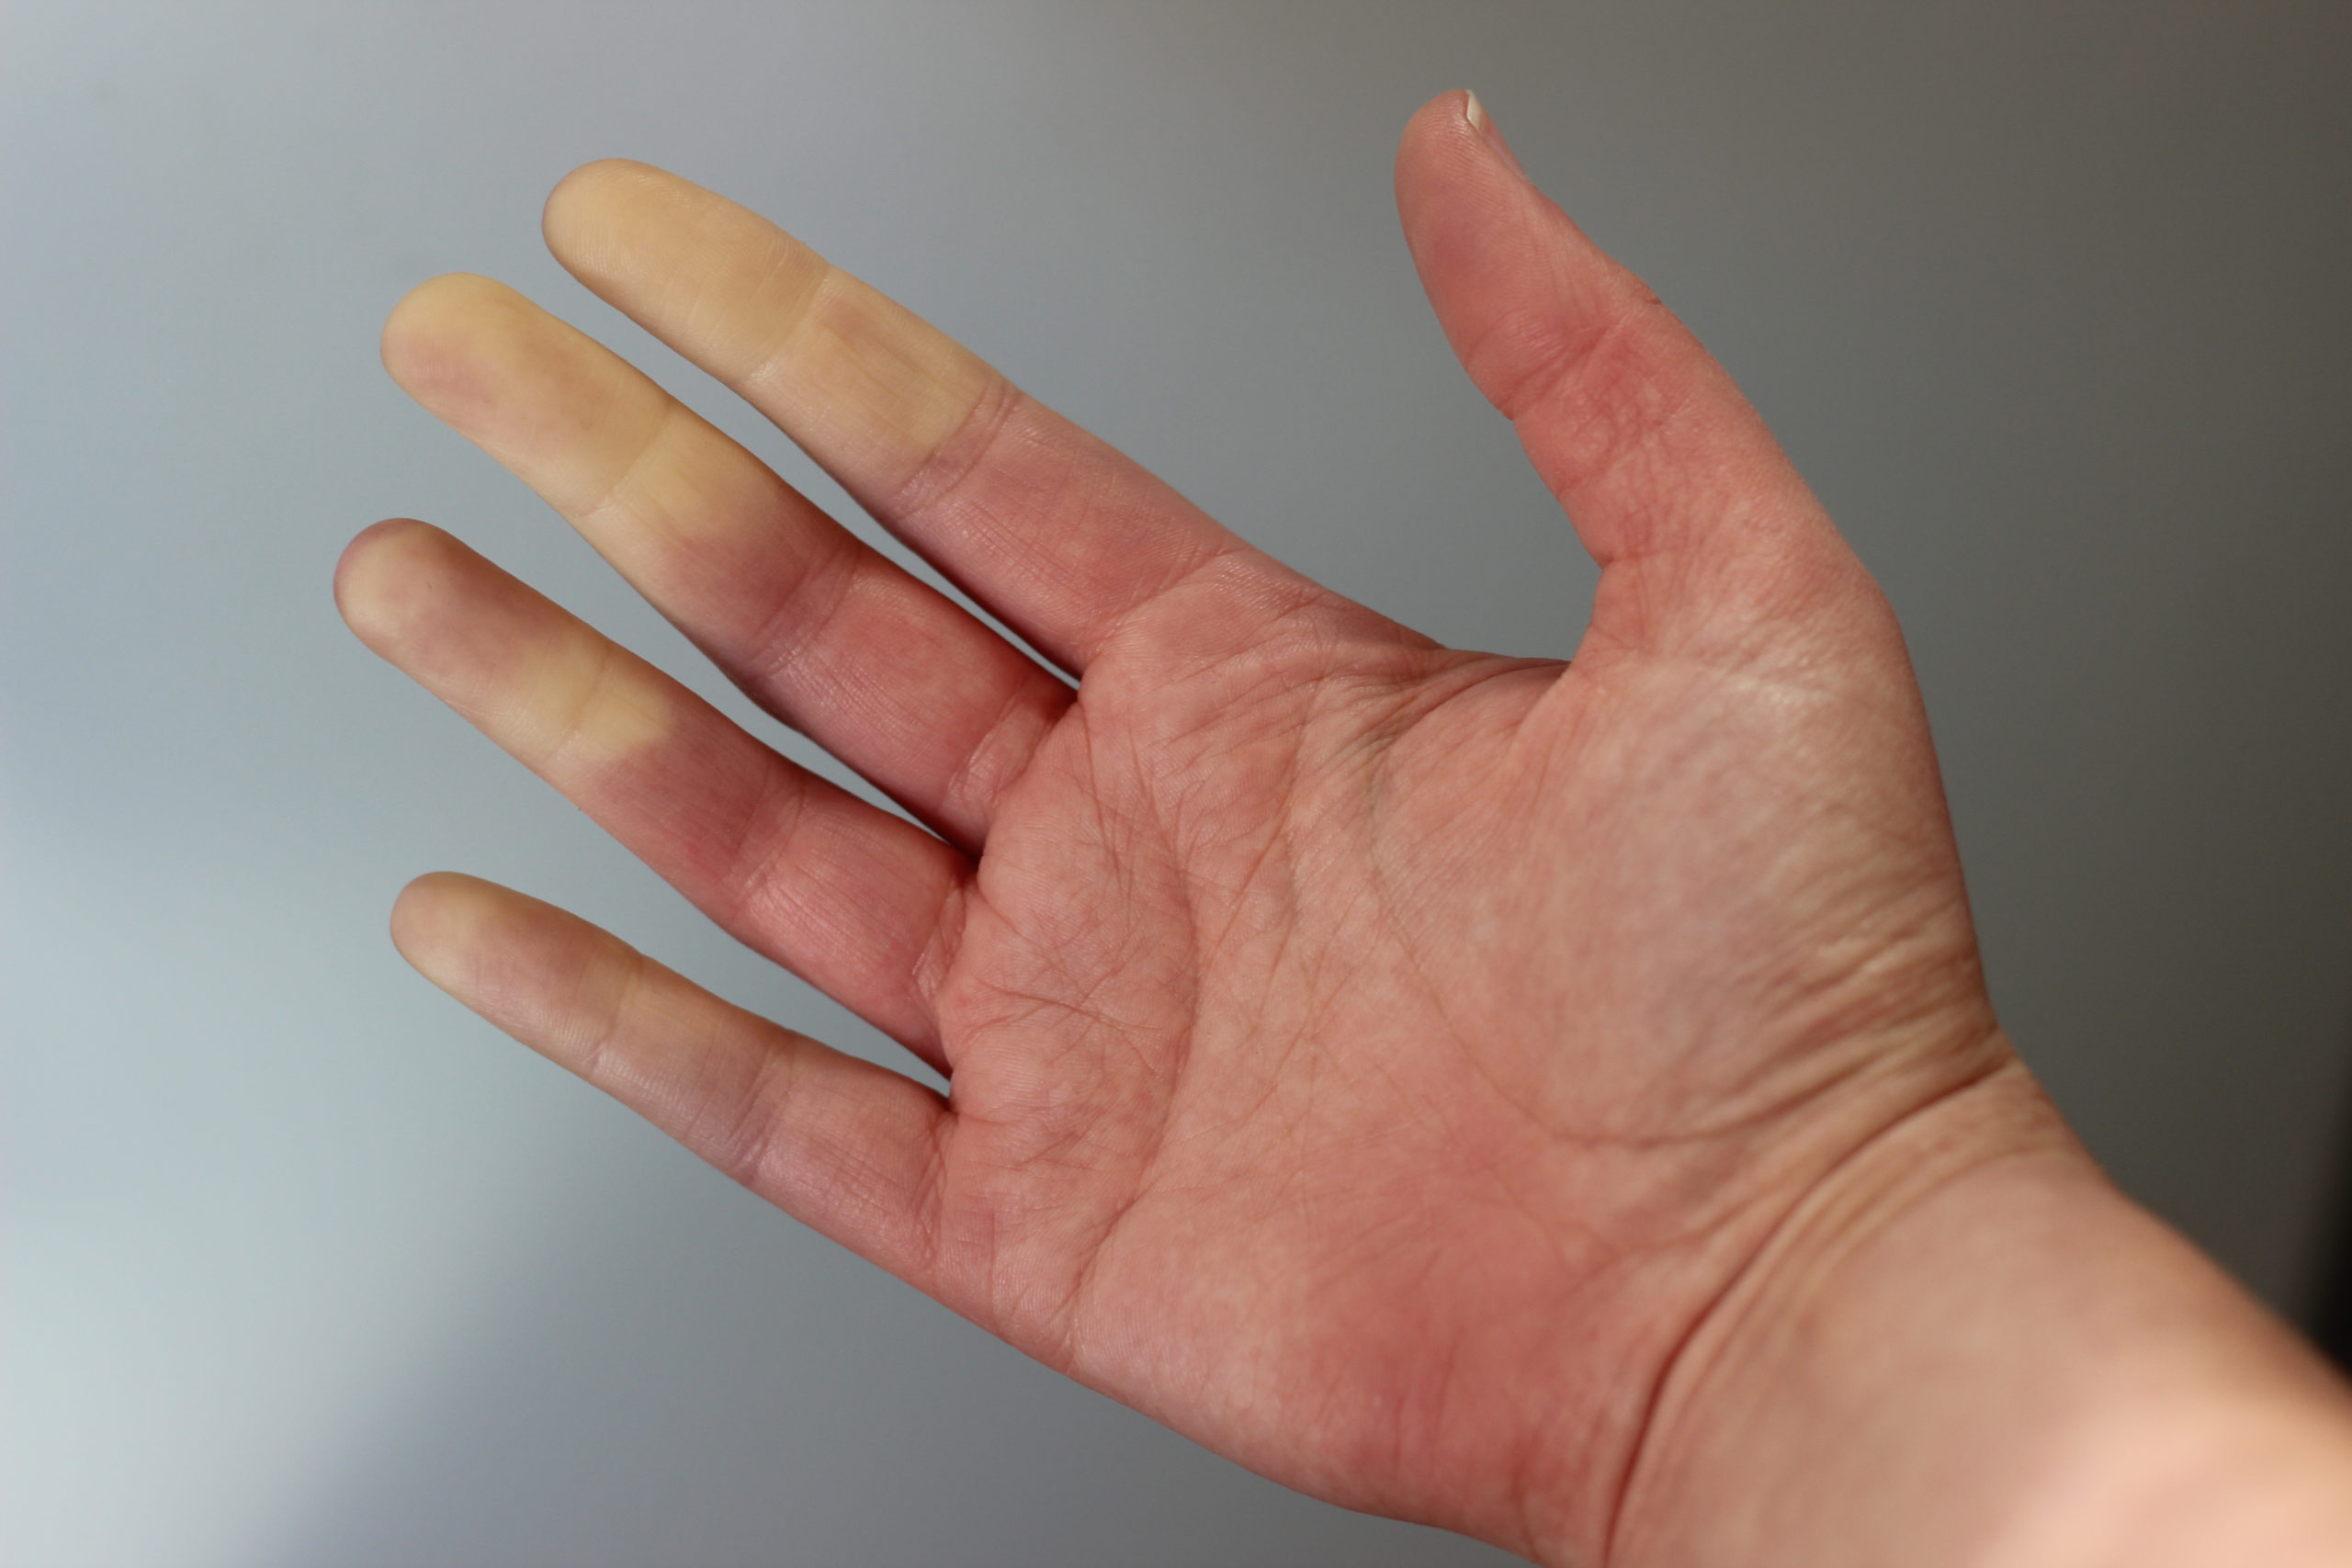 Raynaud’s is a condition that affects blood circulation causing some areas of the body, such as fingers and toes, to feel painfully numb or freezing cold in response to changes in temperature